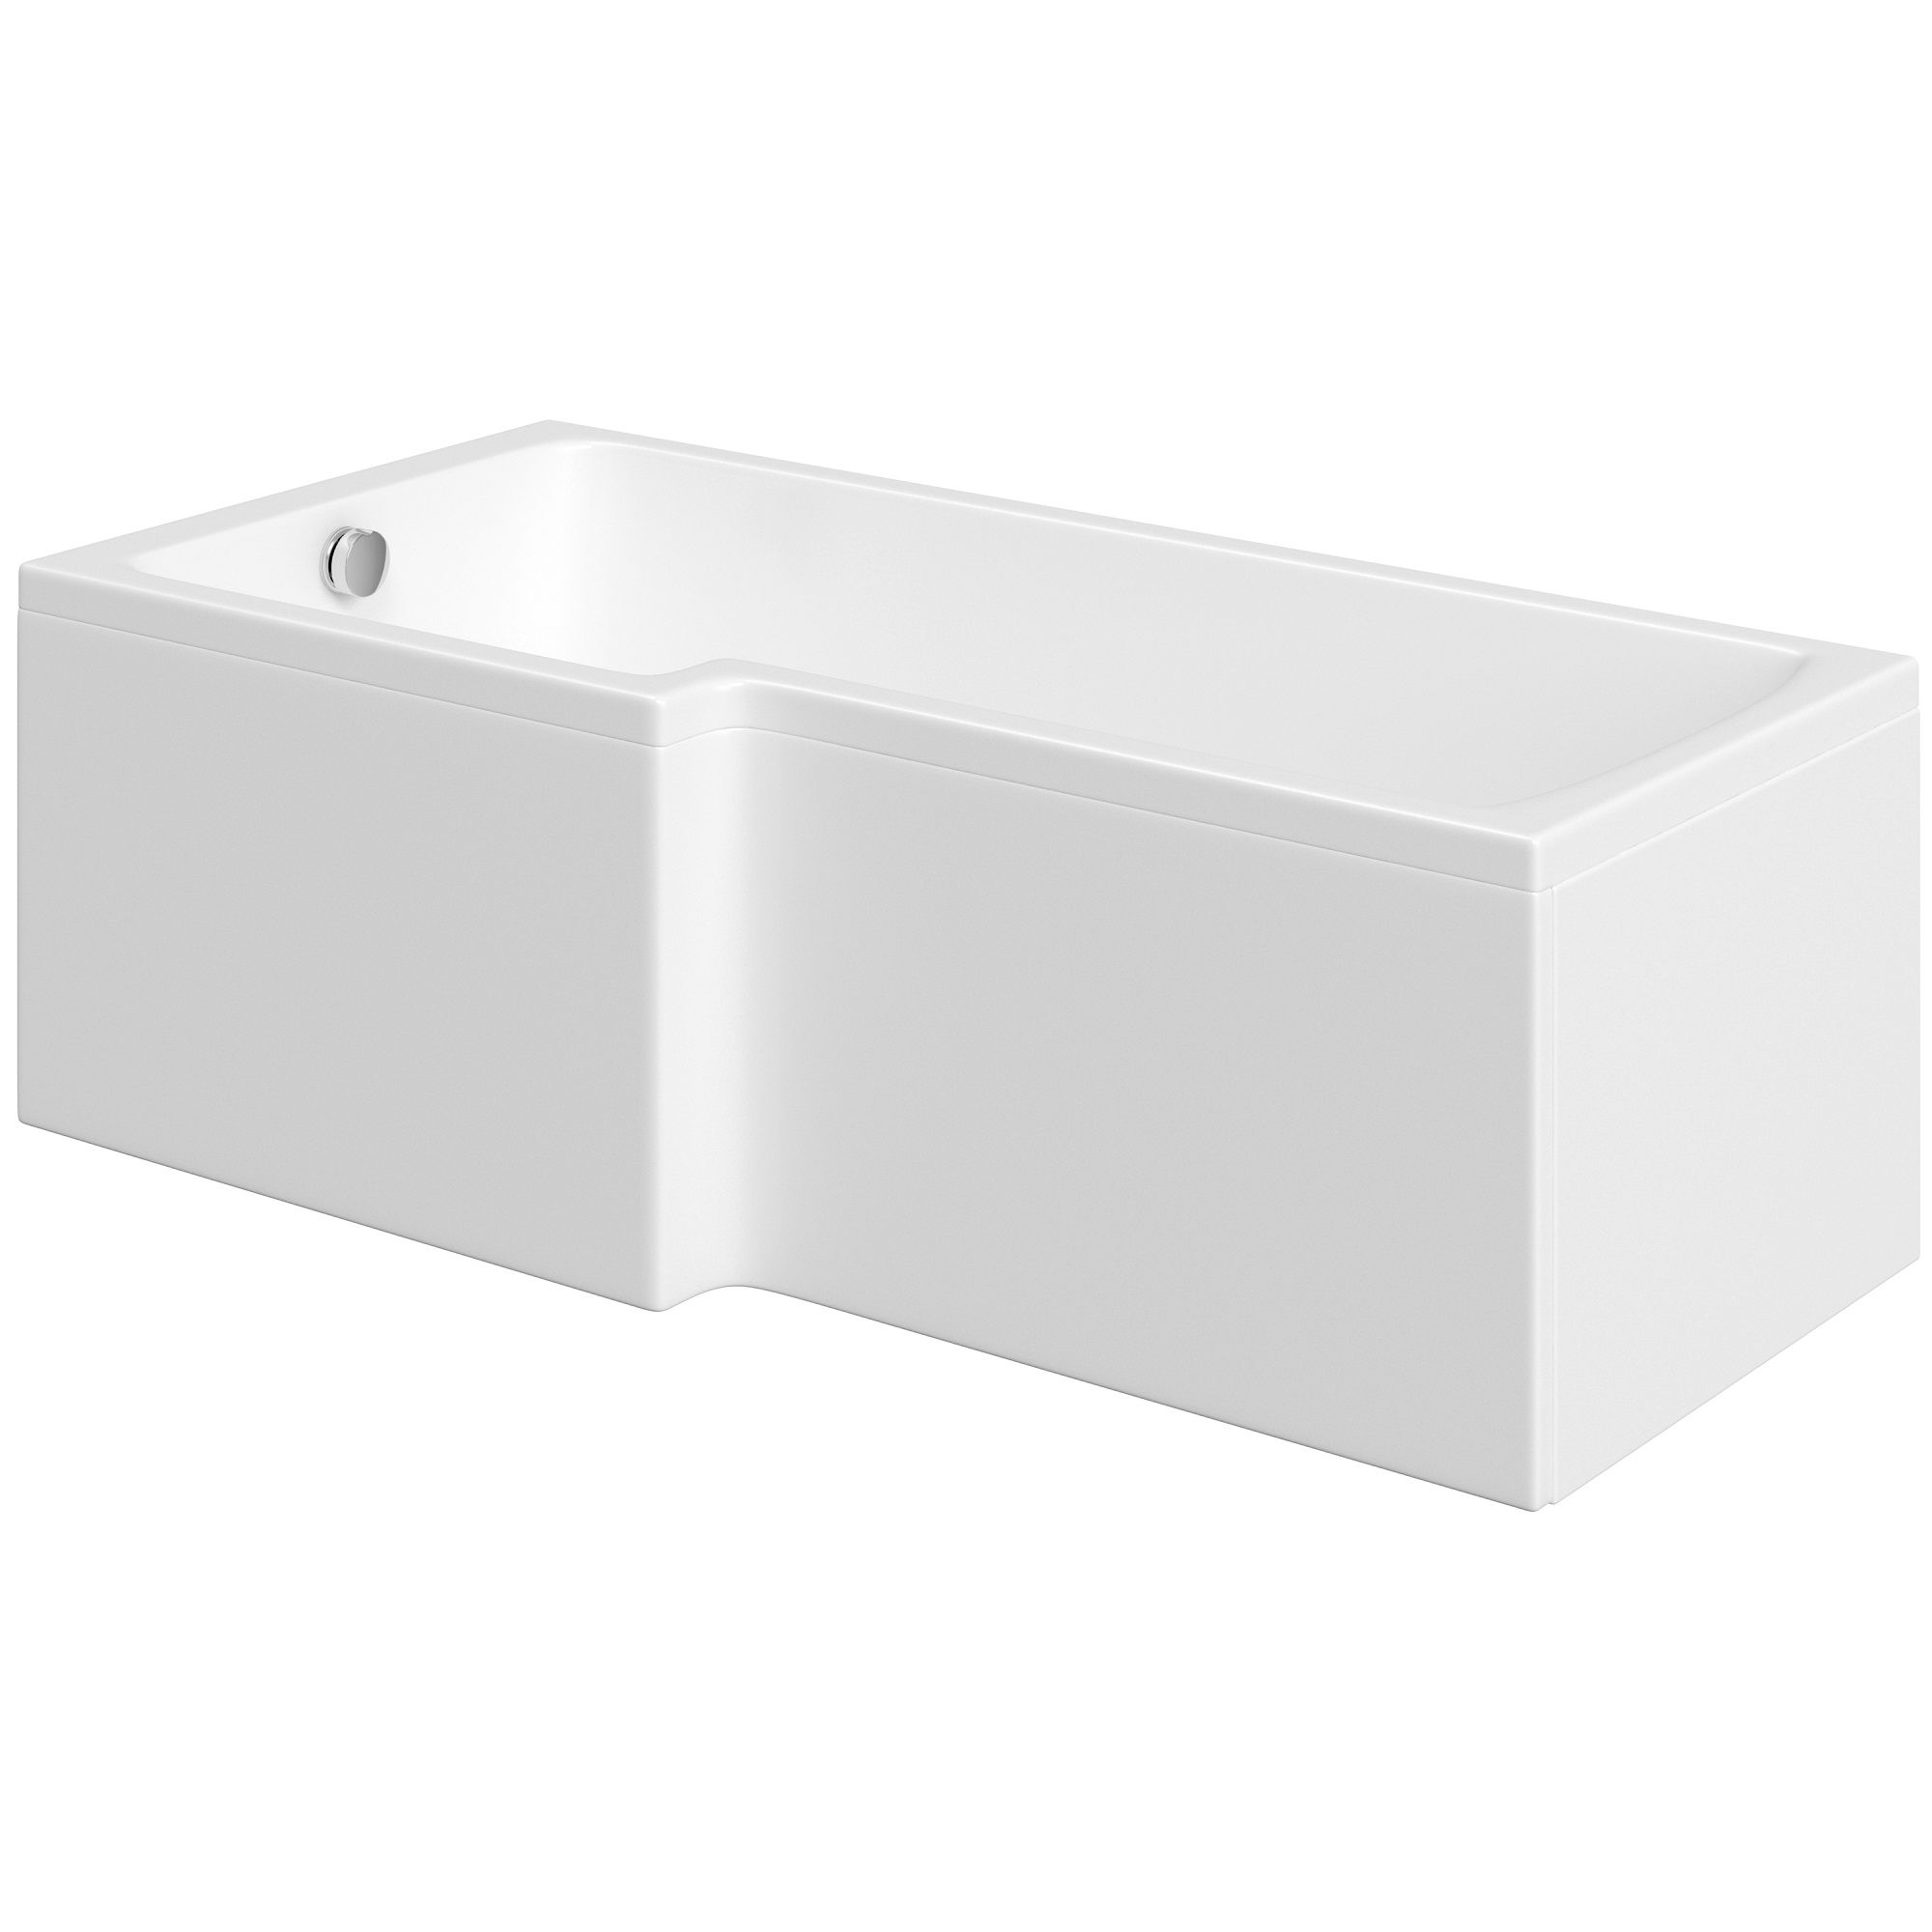 Cooke & Lewis Solarna White Acrylic L-shaped Left-handed Shower Bath (L)1700mm (W)850mm